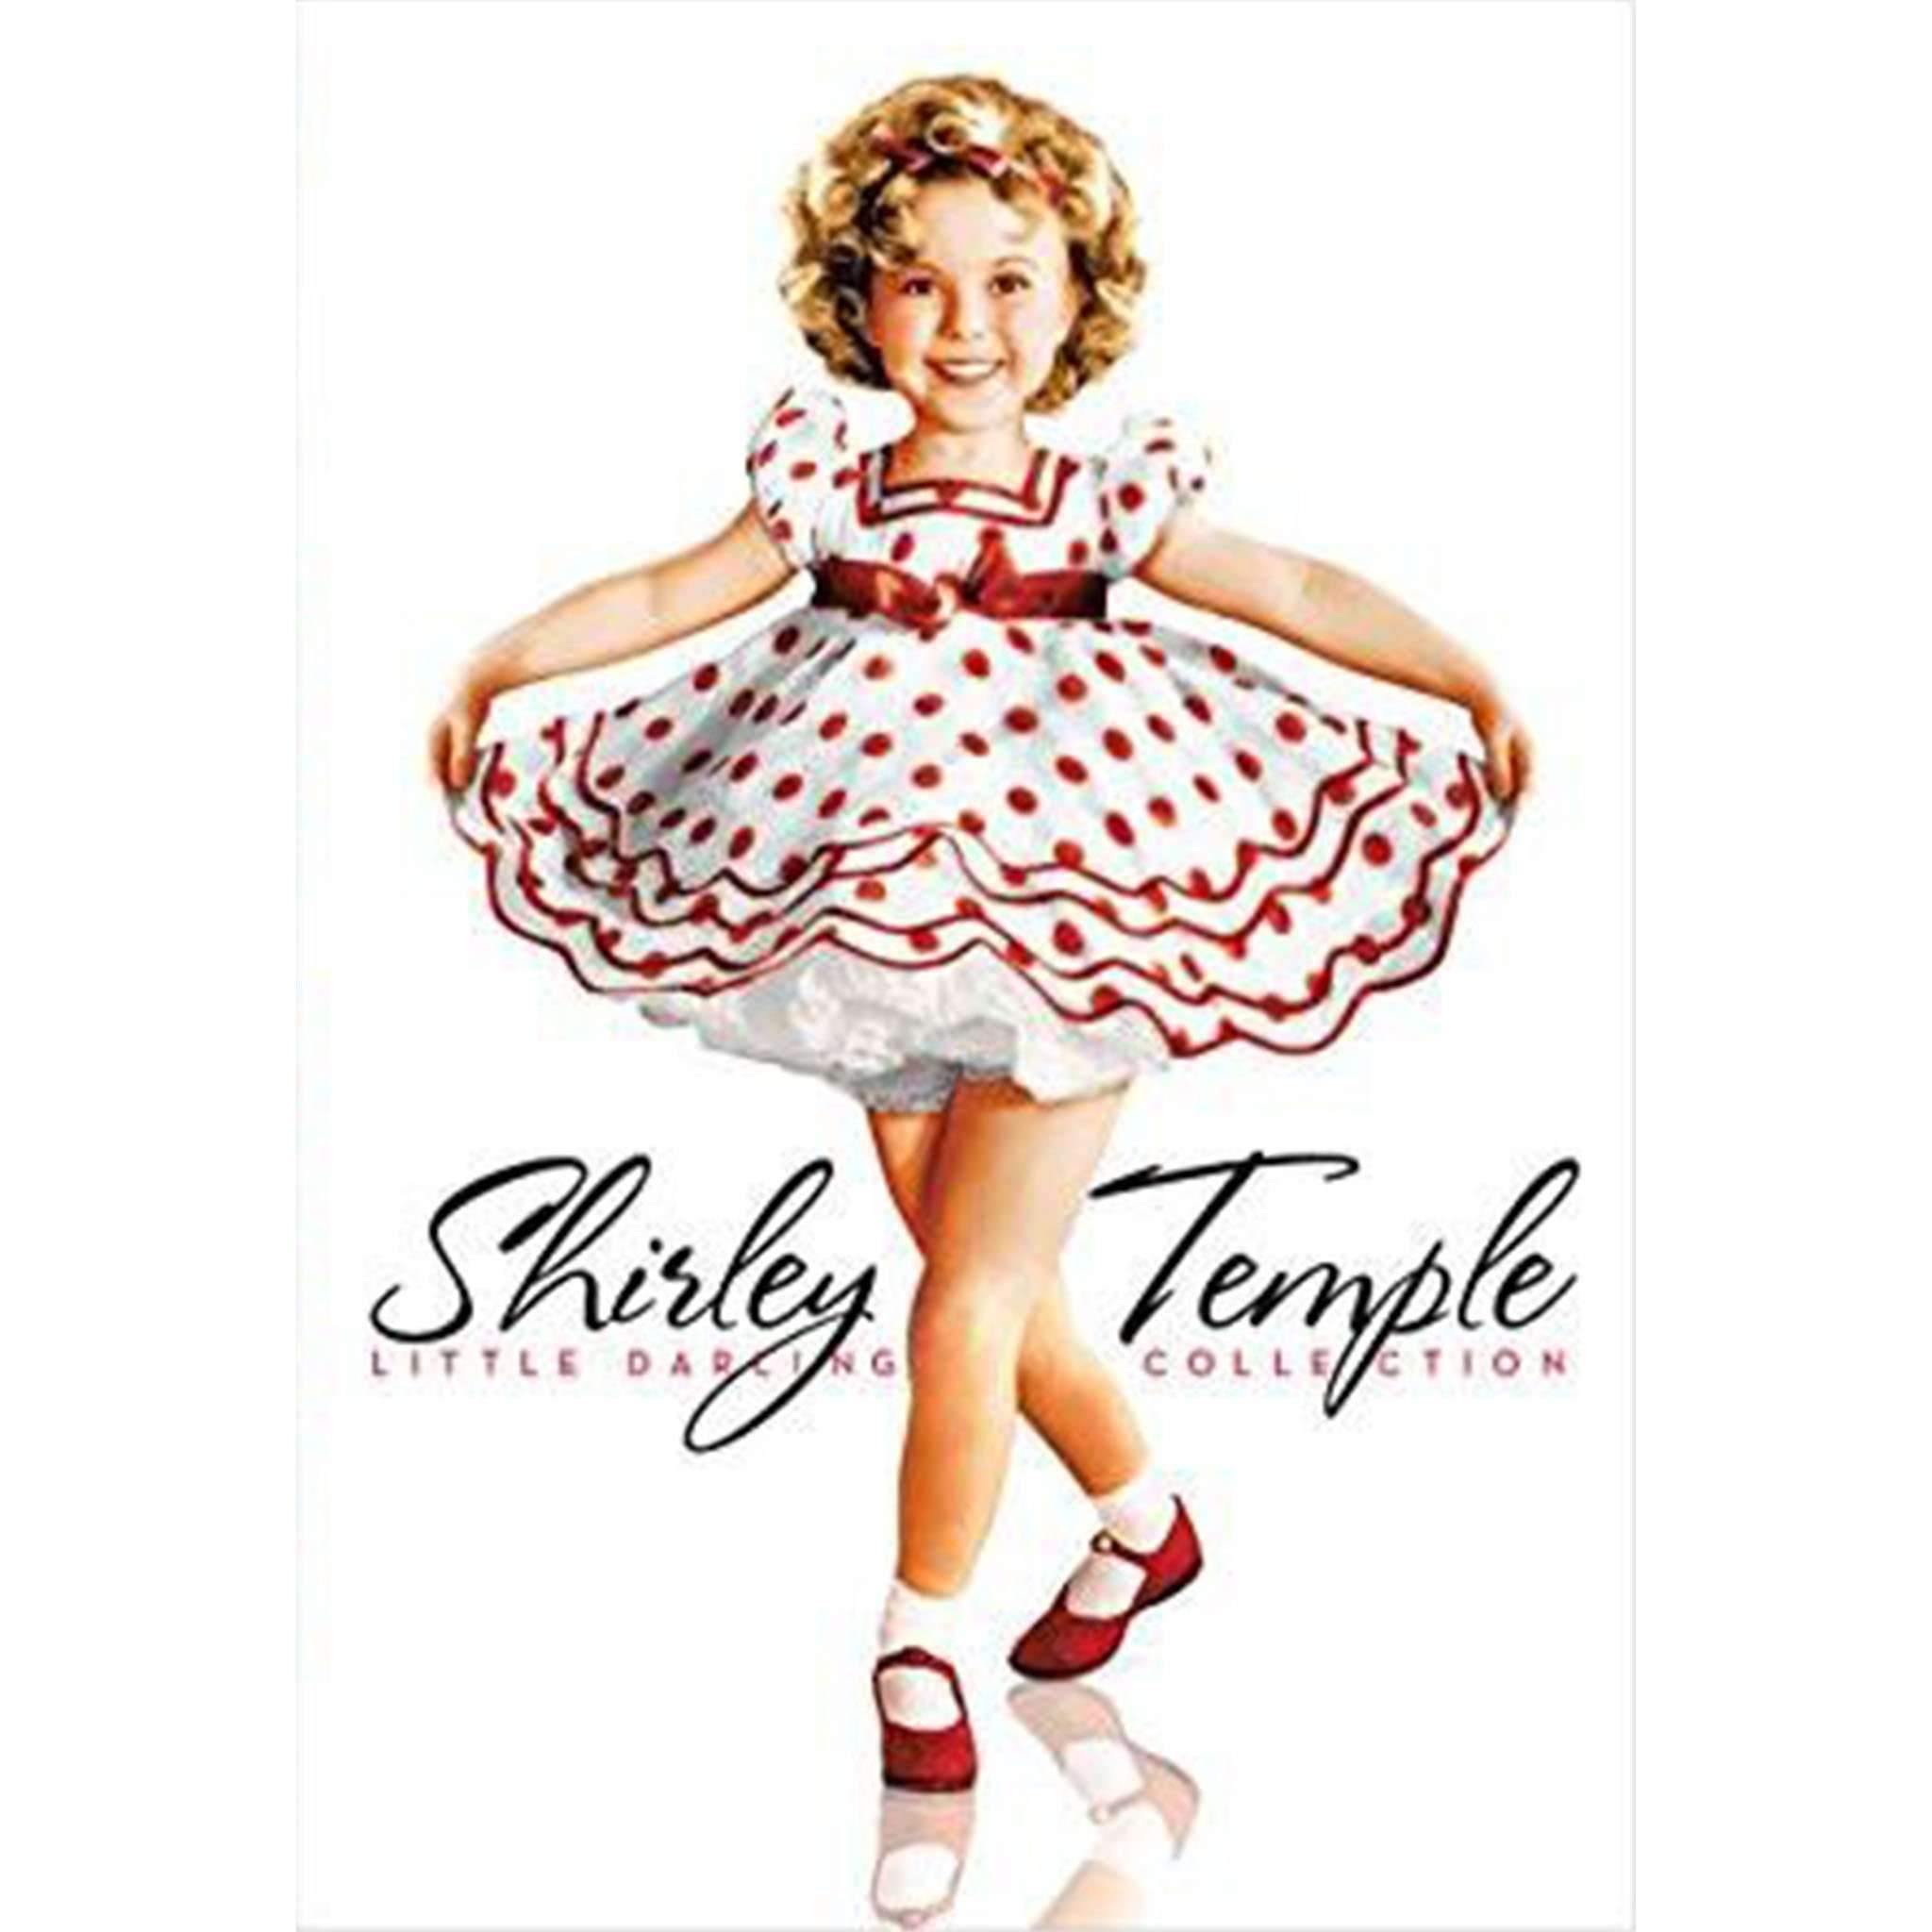 Shirley Temple Little Darling Collection DVD Box Set – Blaze DVDs